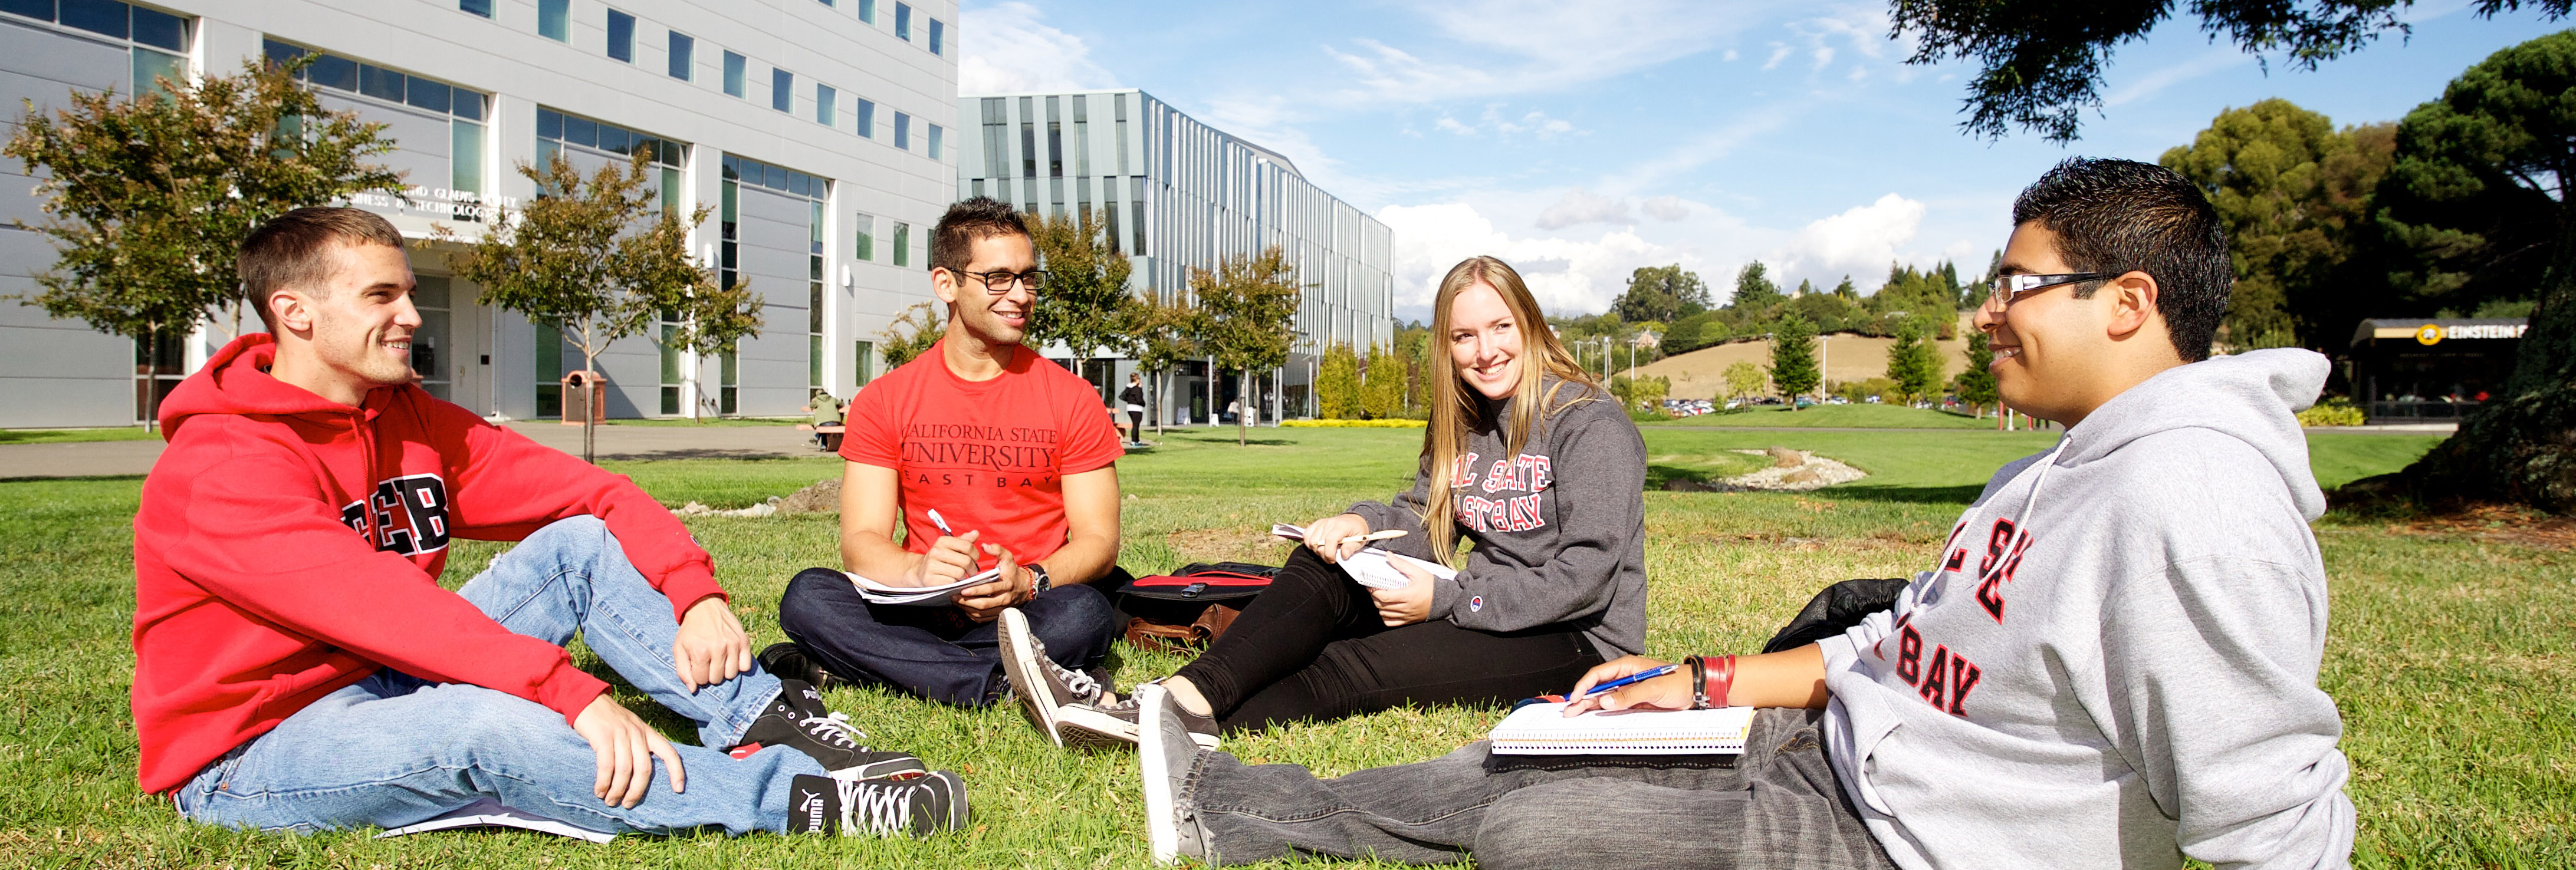 Students on lawn in front of Valley Business Technology building